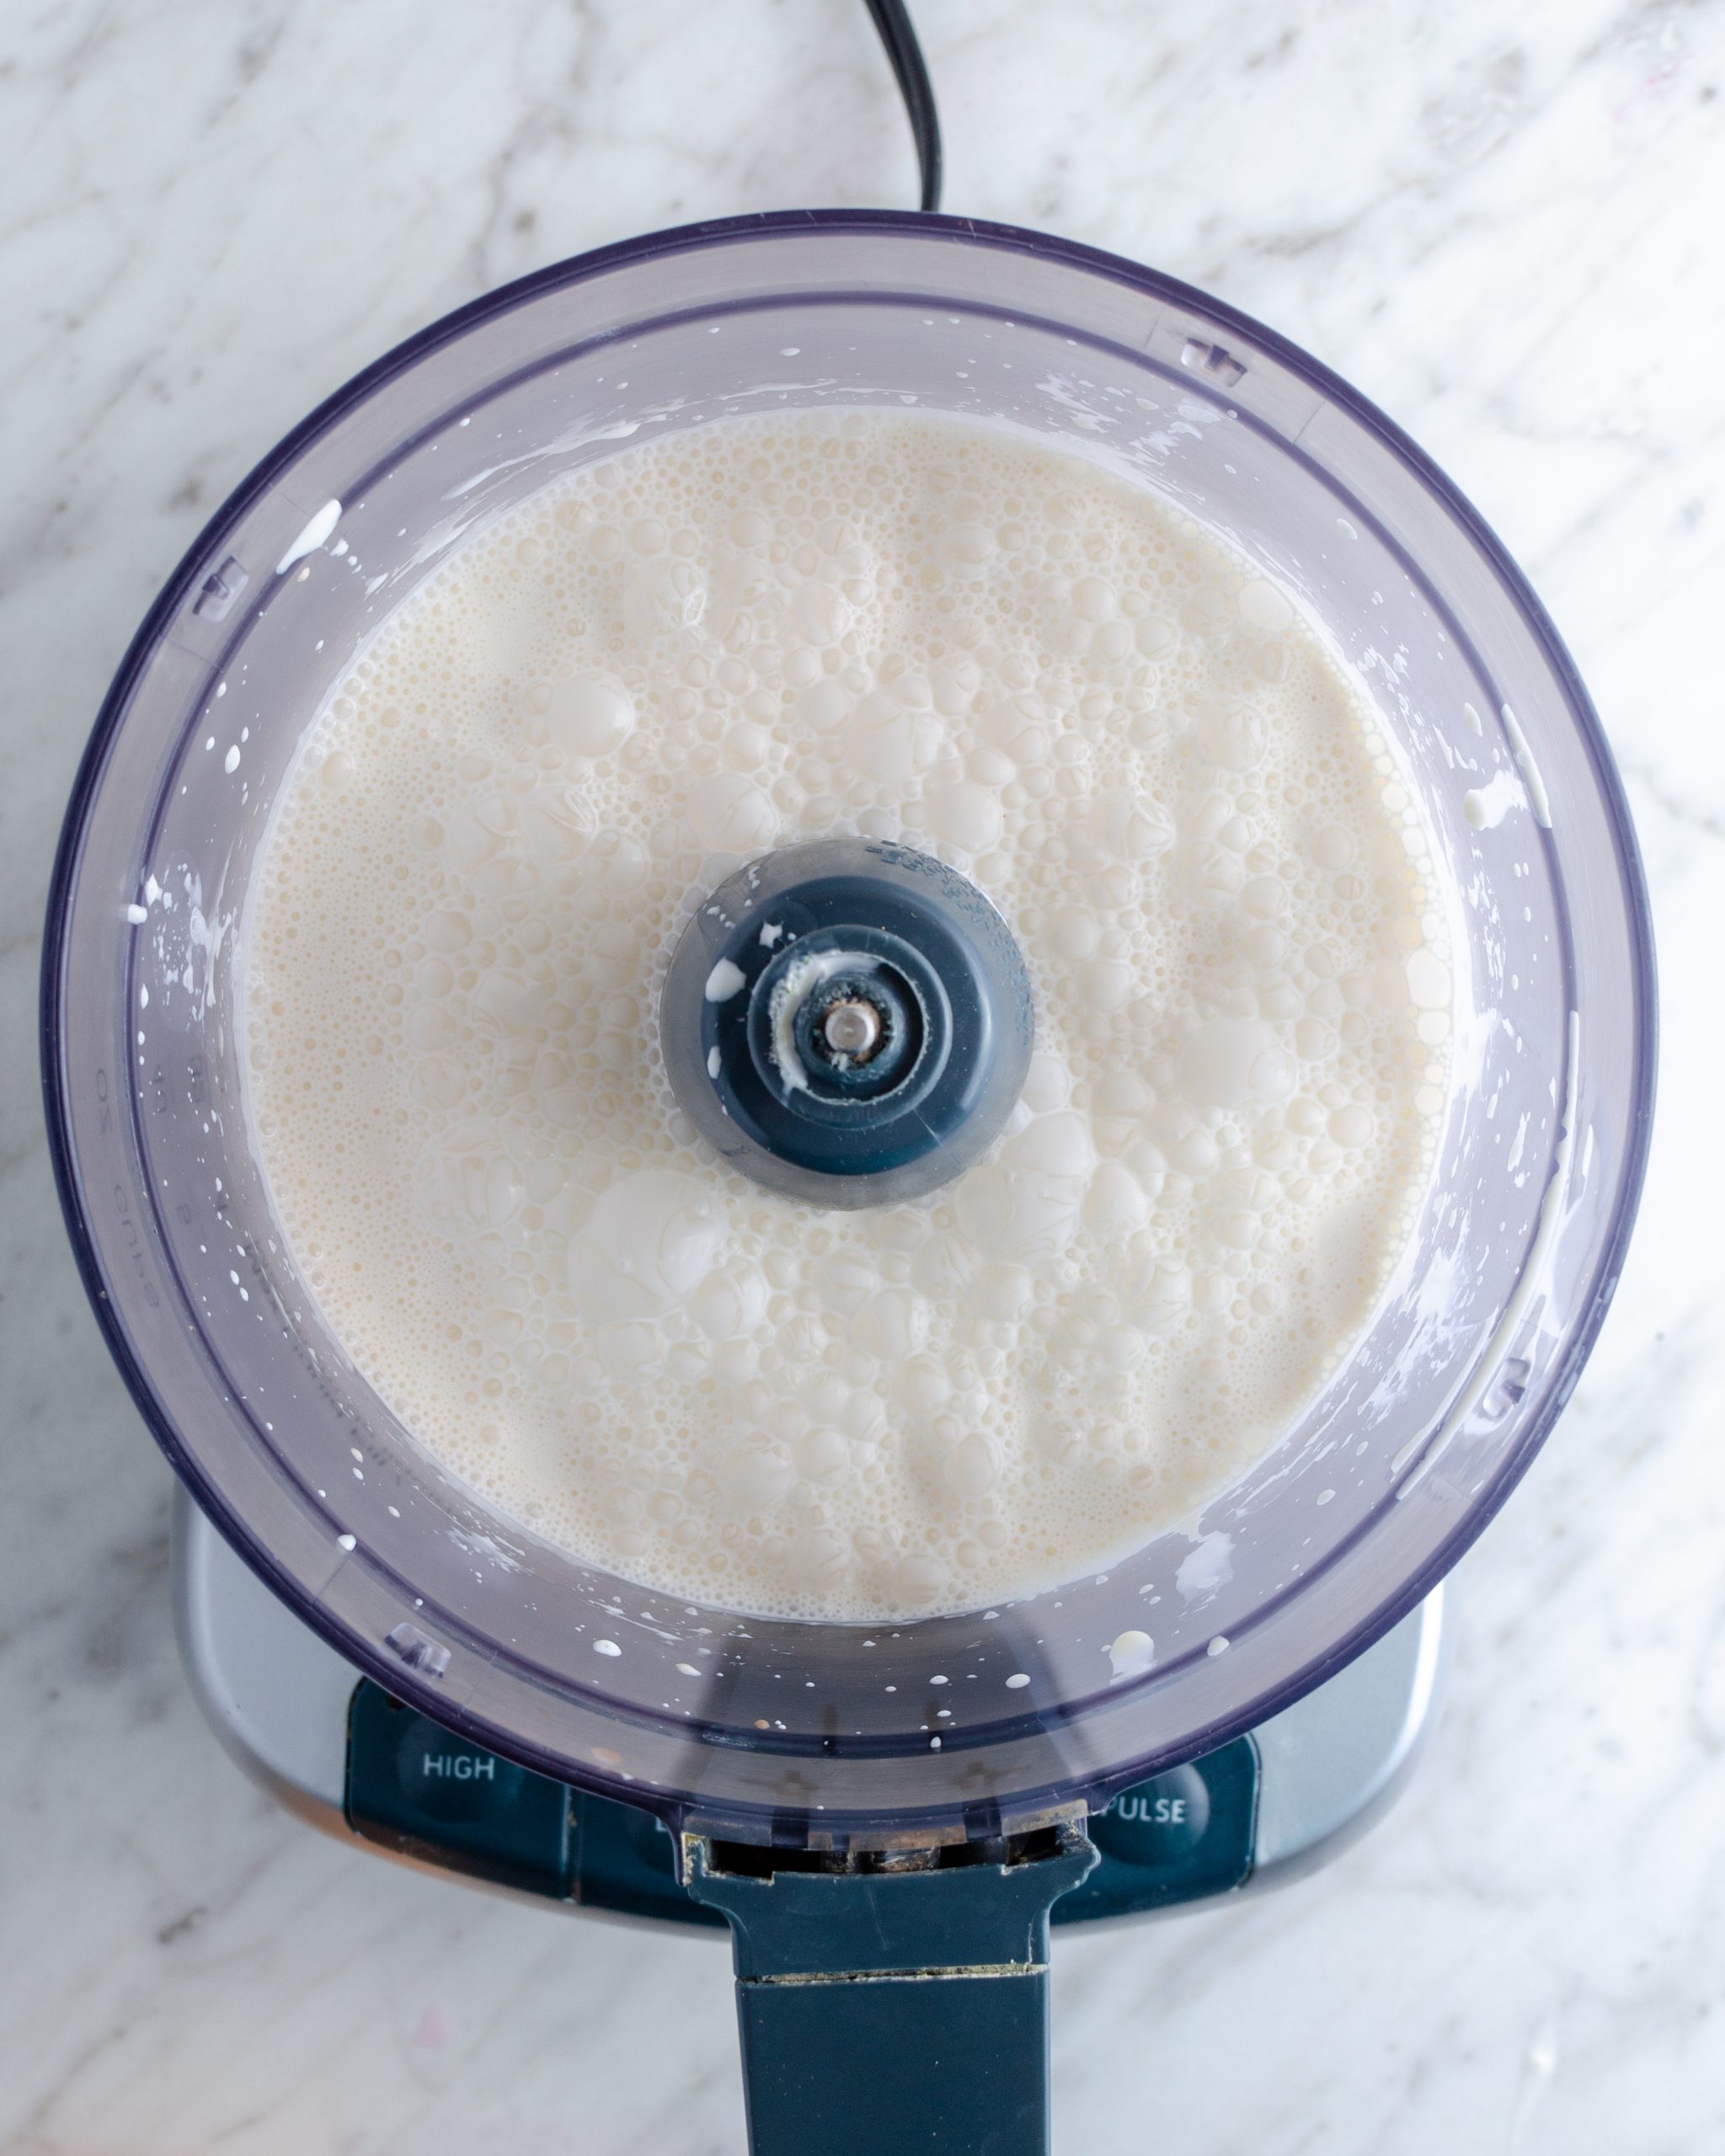 Combine the vanilla, heavy whipping cream, and sugar in a blender or food processor. Pulse until well combined. 